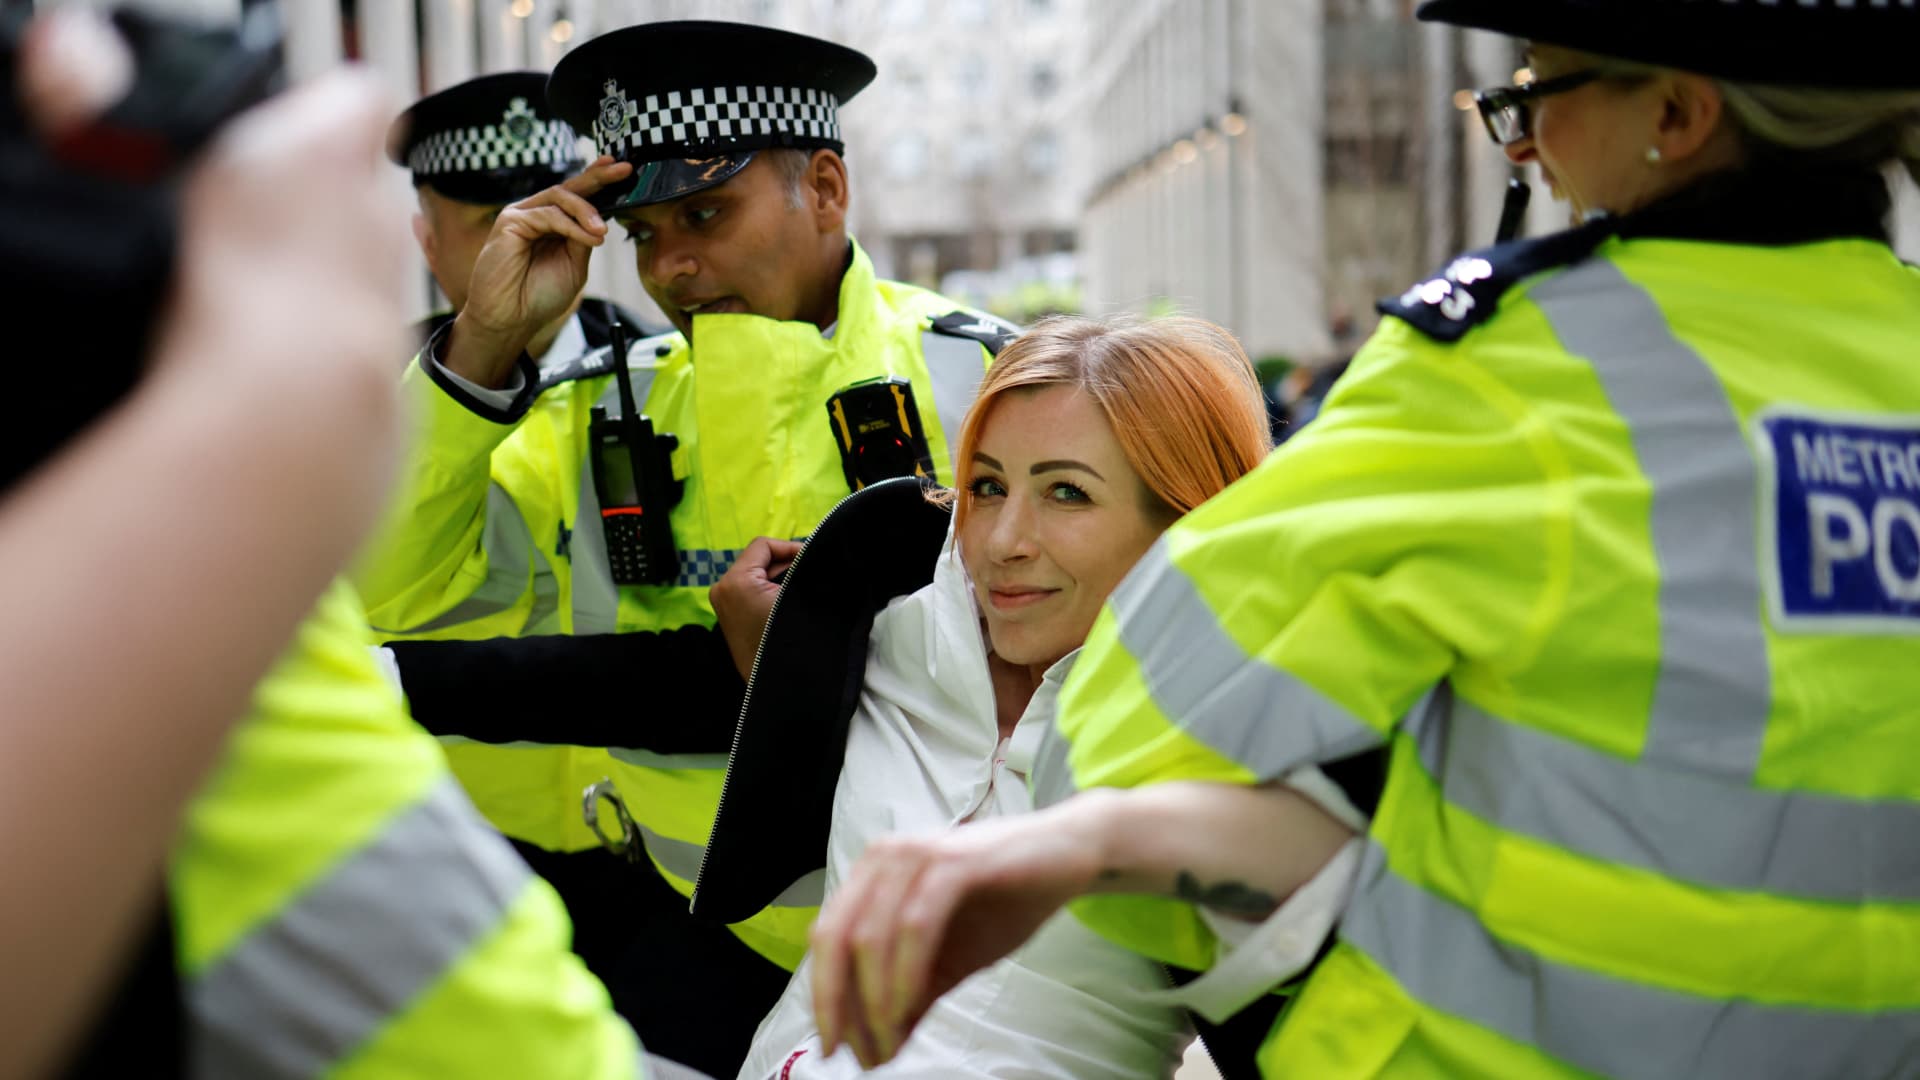 A climate activist from protest group Extinction Rebellion is carried away by police officers on April 13, 2022, after gluing her hands to the reception desk of Shell's headquarters. XR has held a series of protests in an attempt to stop the fossil fuel economy.